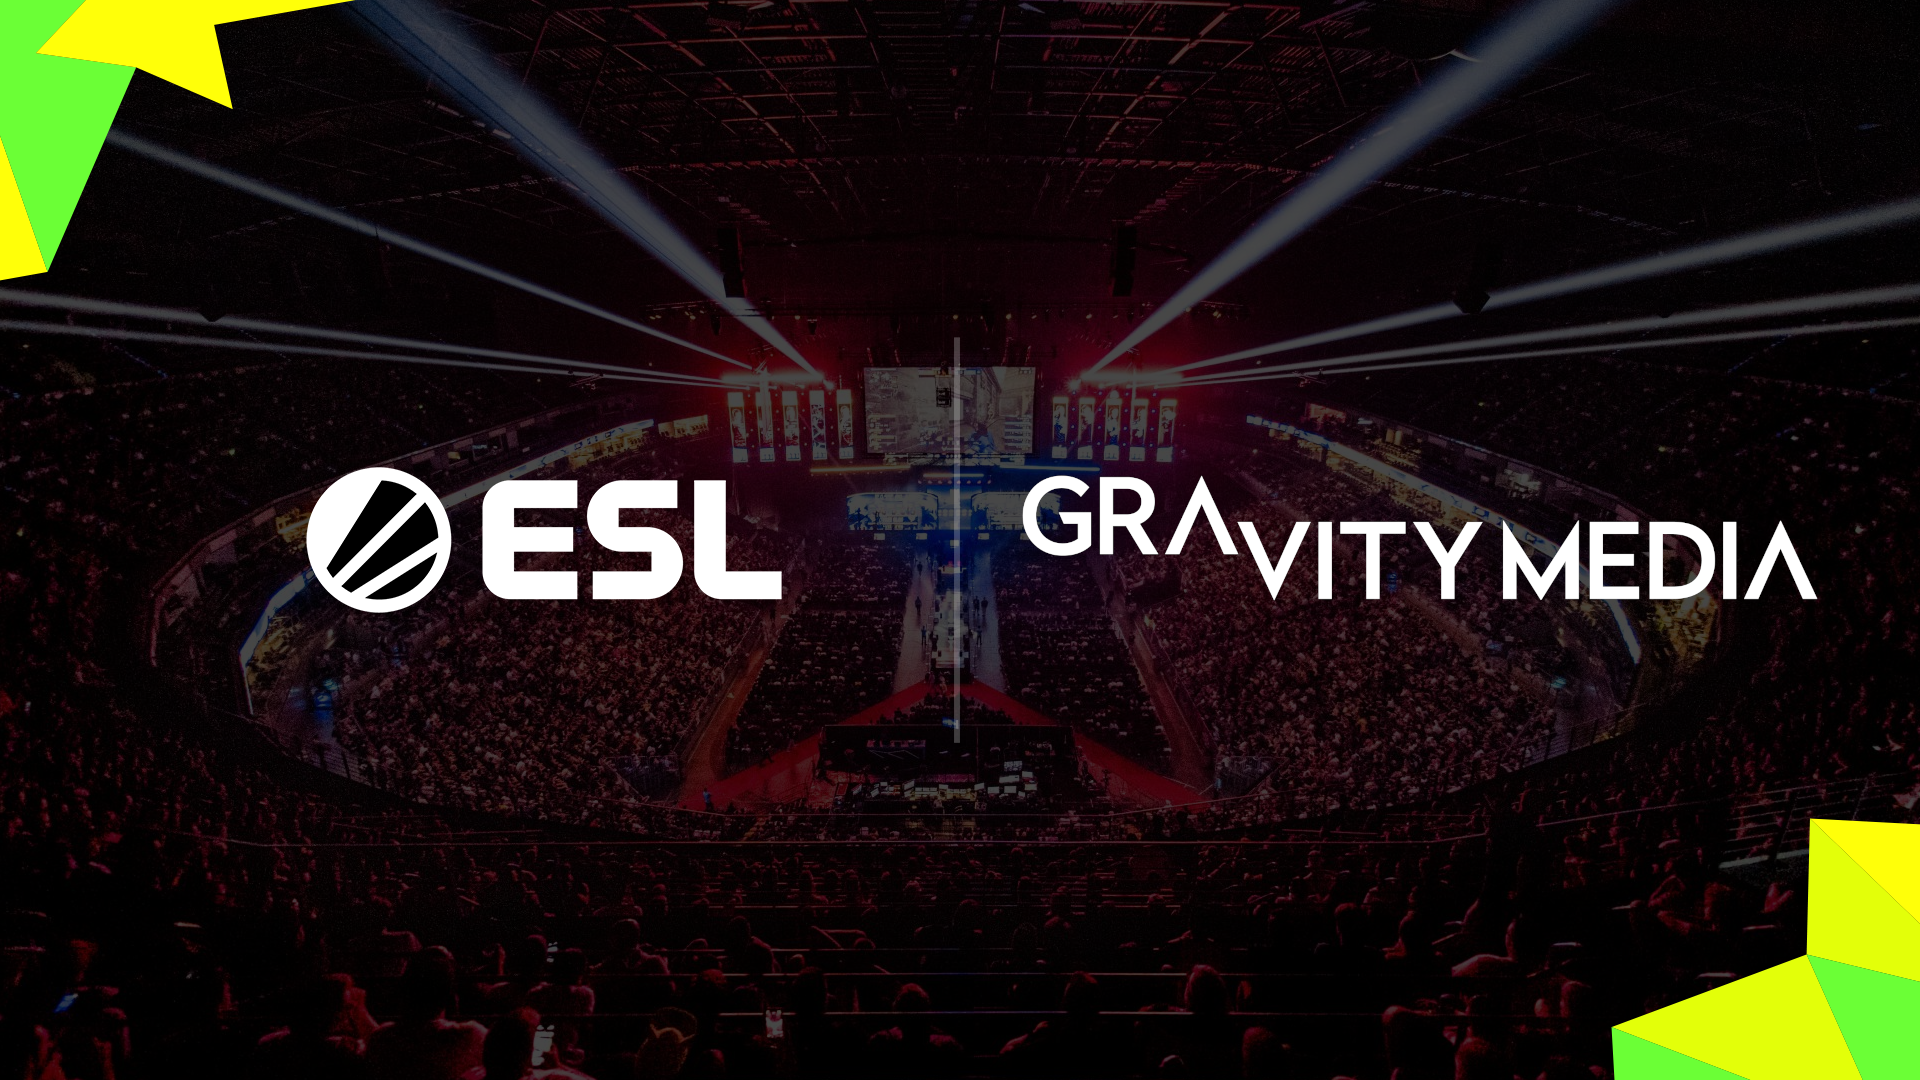 ESL Gaming has partnered with Gravity Media – Counter-Strike: Global Offensive